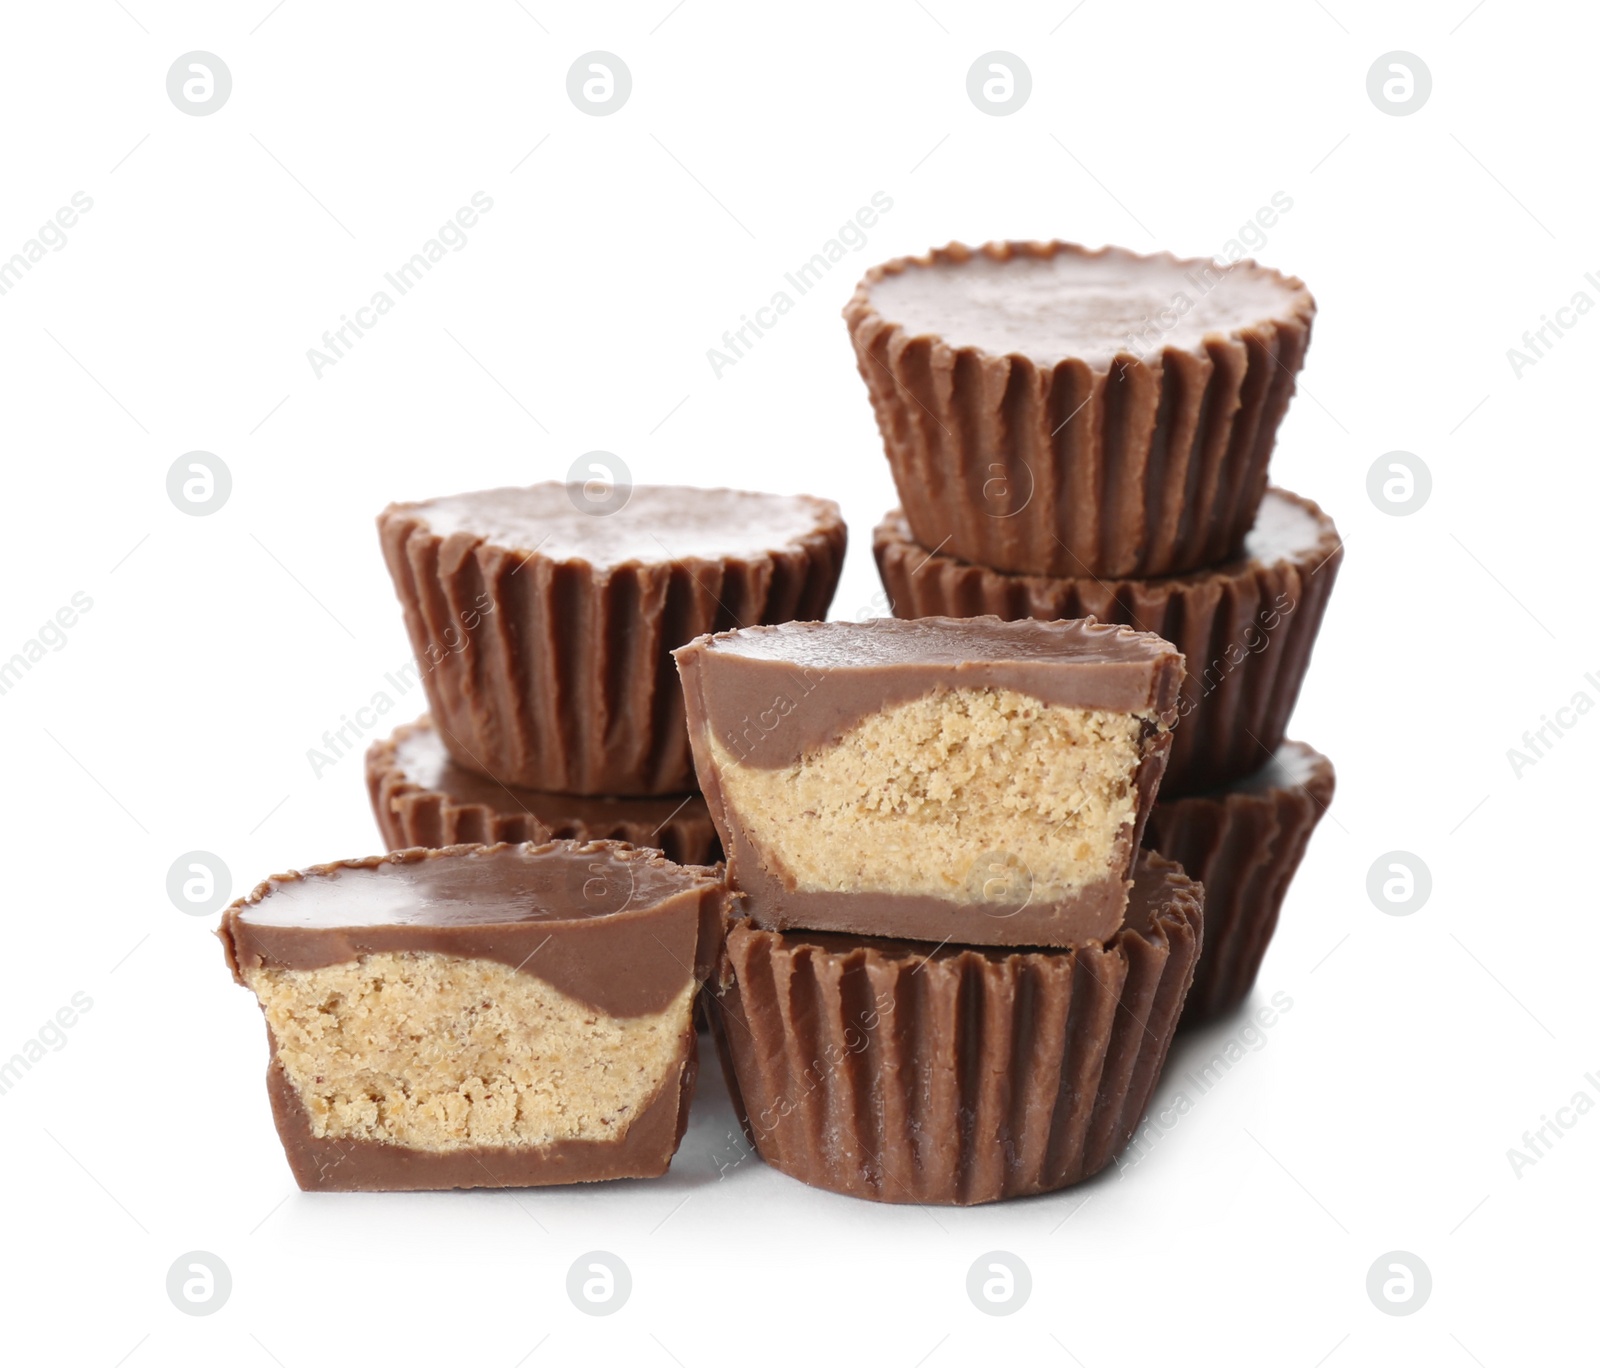 Photo of Cut and whole delicious peanut butter cups on white background